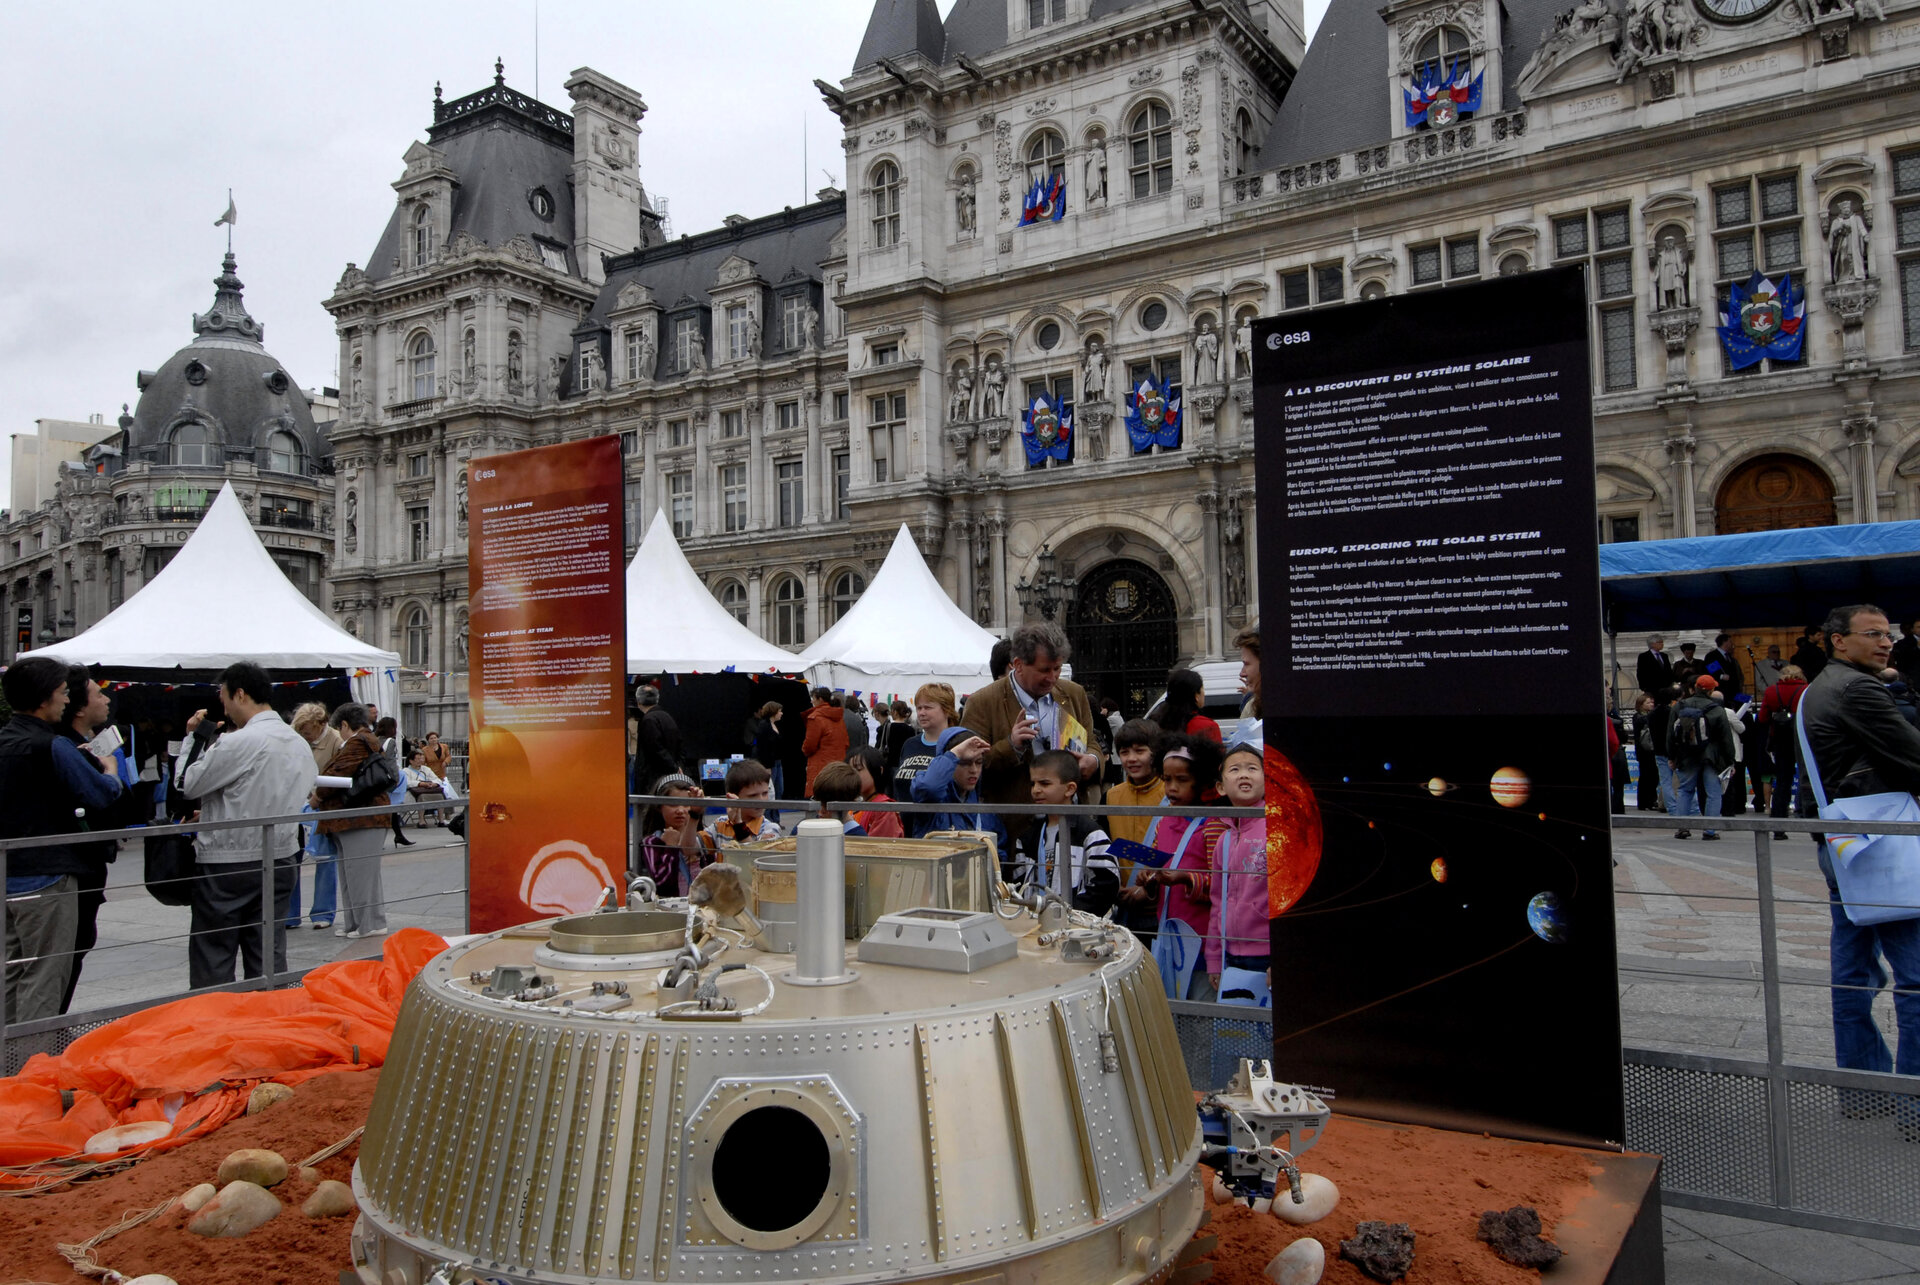 A full-scale model of Huygens landed in Paris